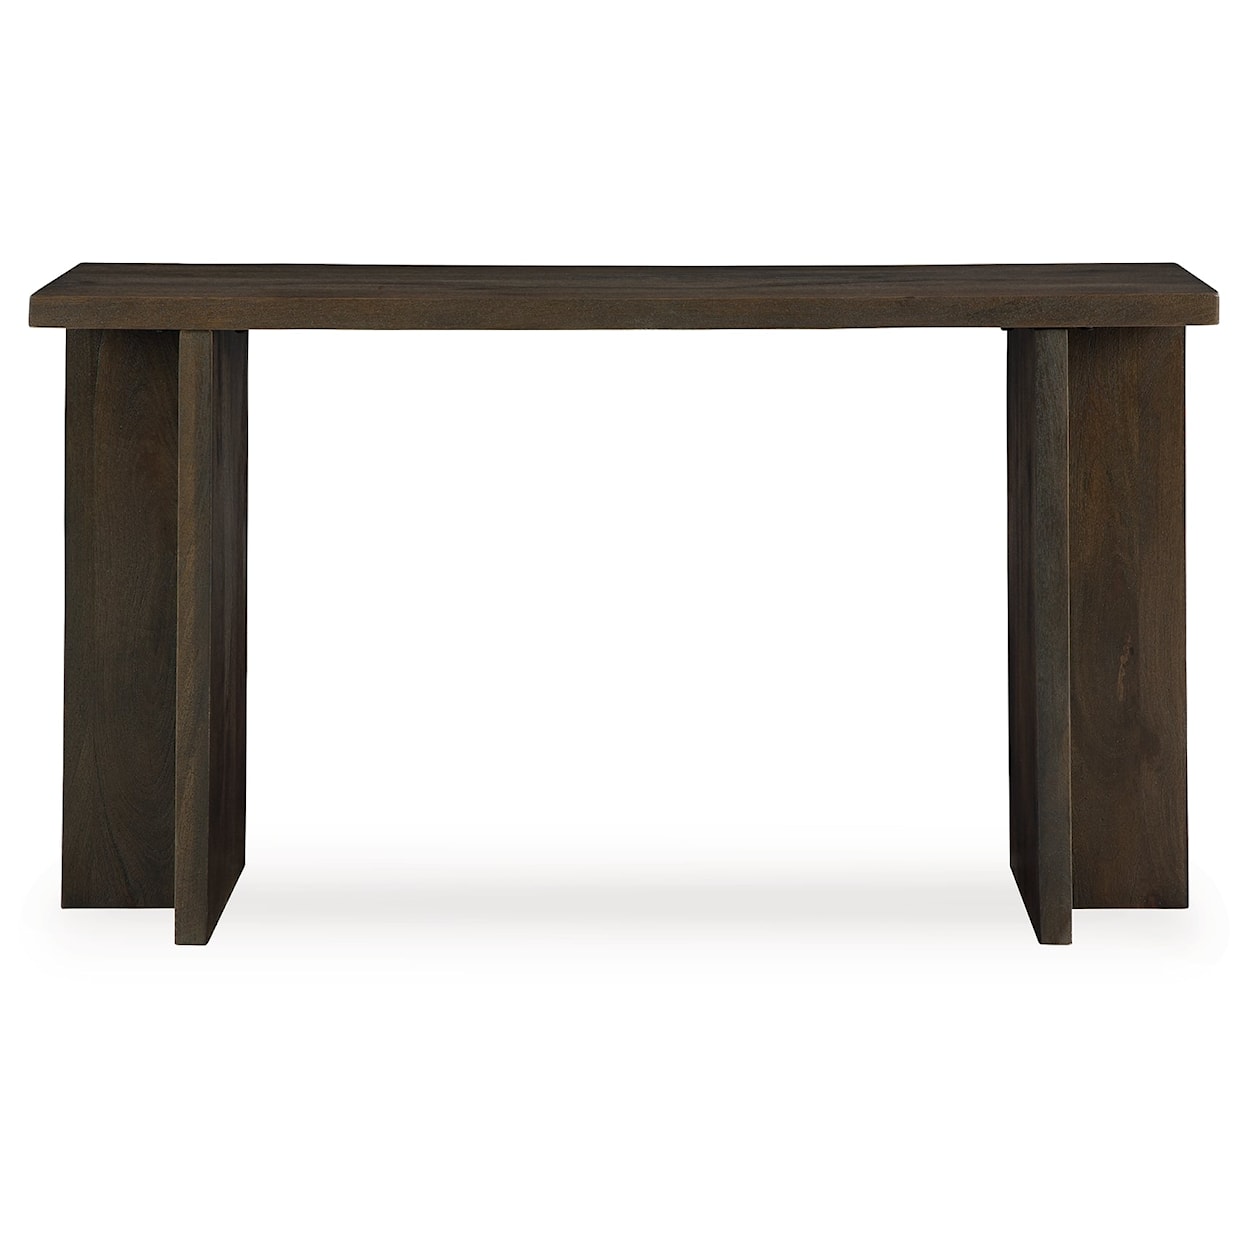 StyleLine Jalenry Console Sofa Table